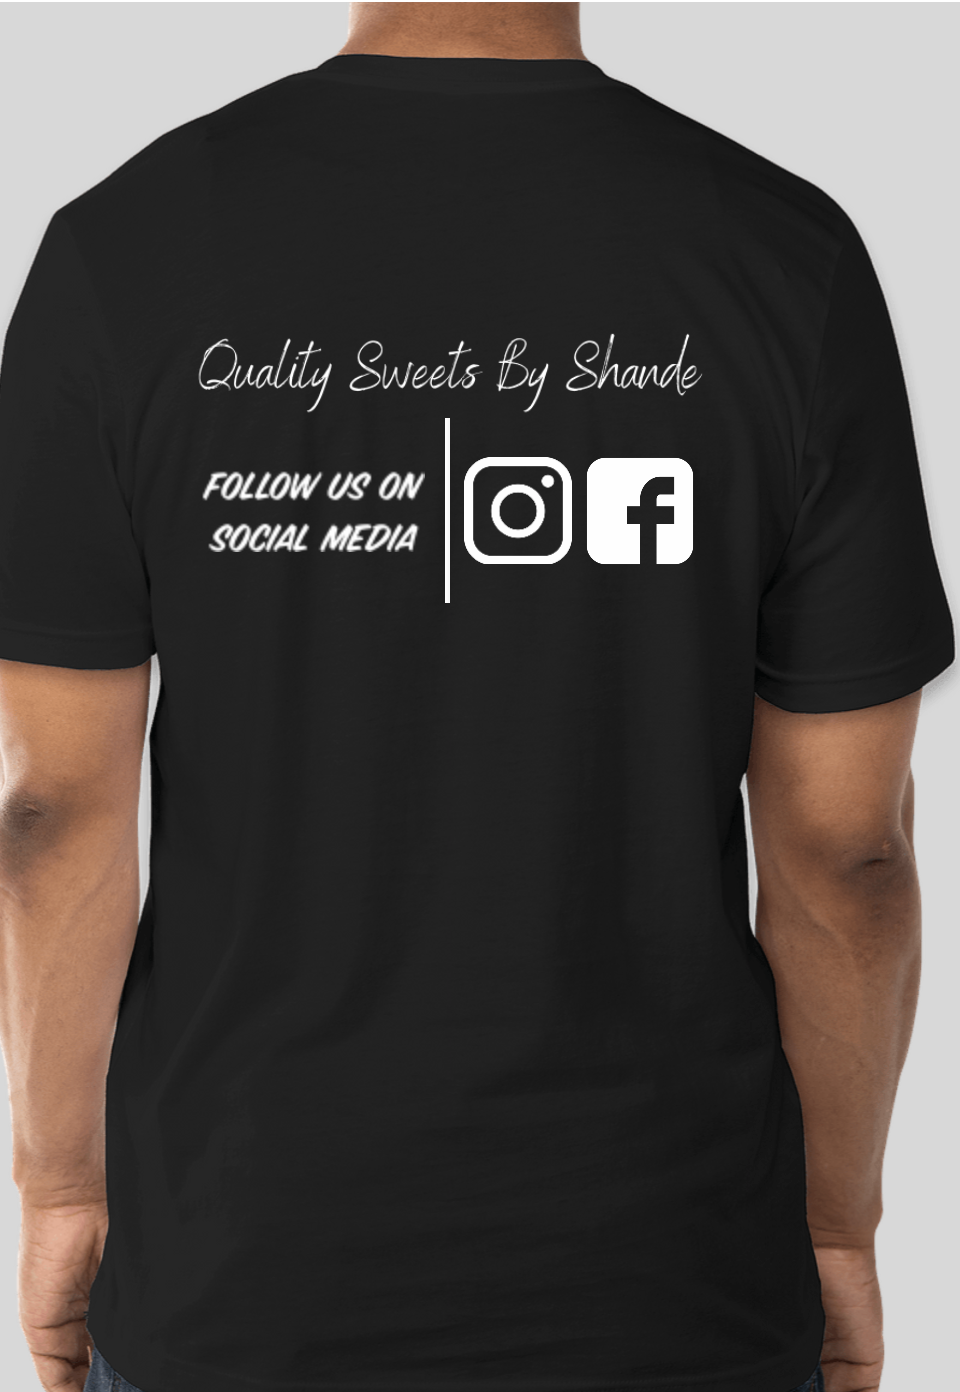 By QS Shande Sweets | Quality T-shirt